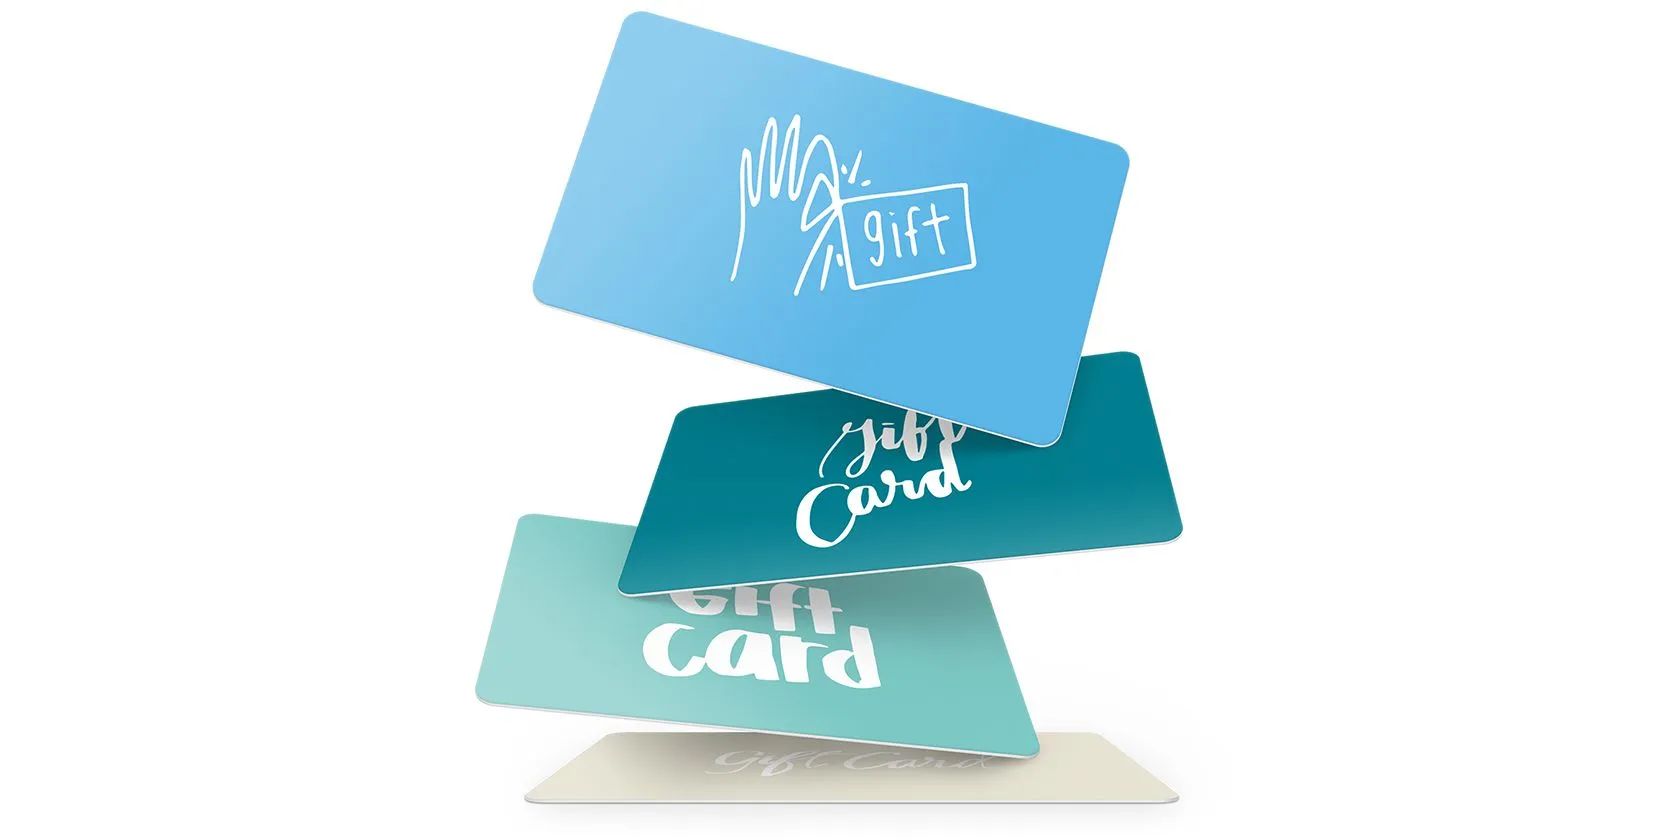 squareup gift cards